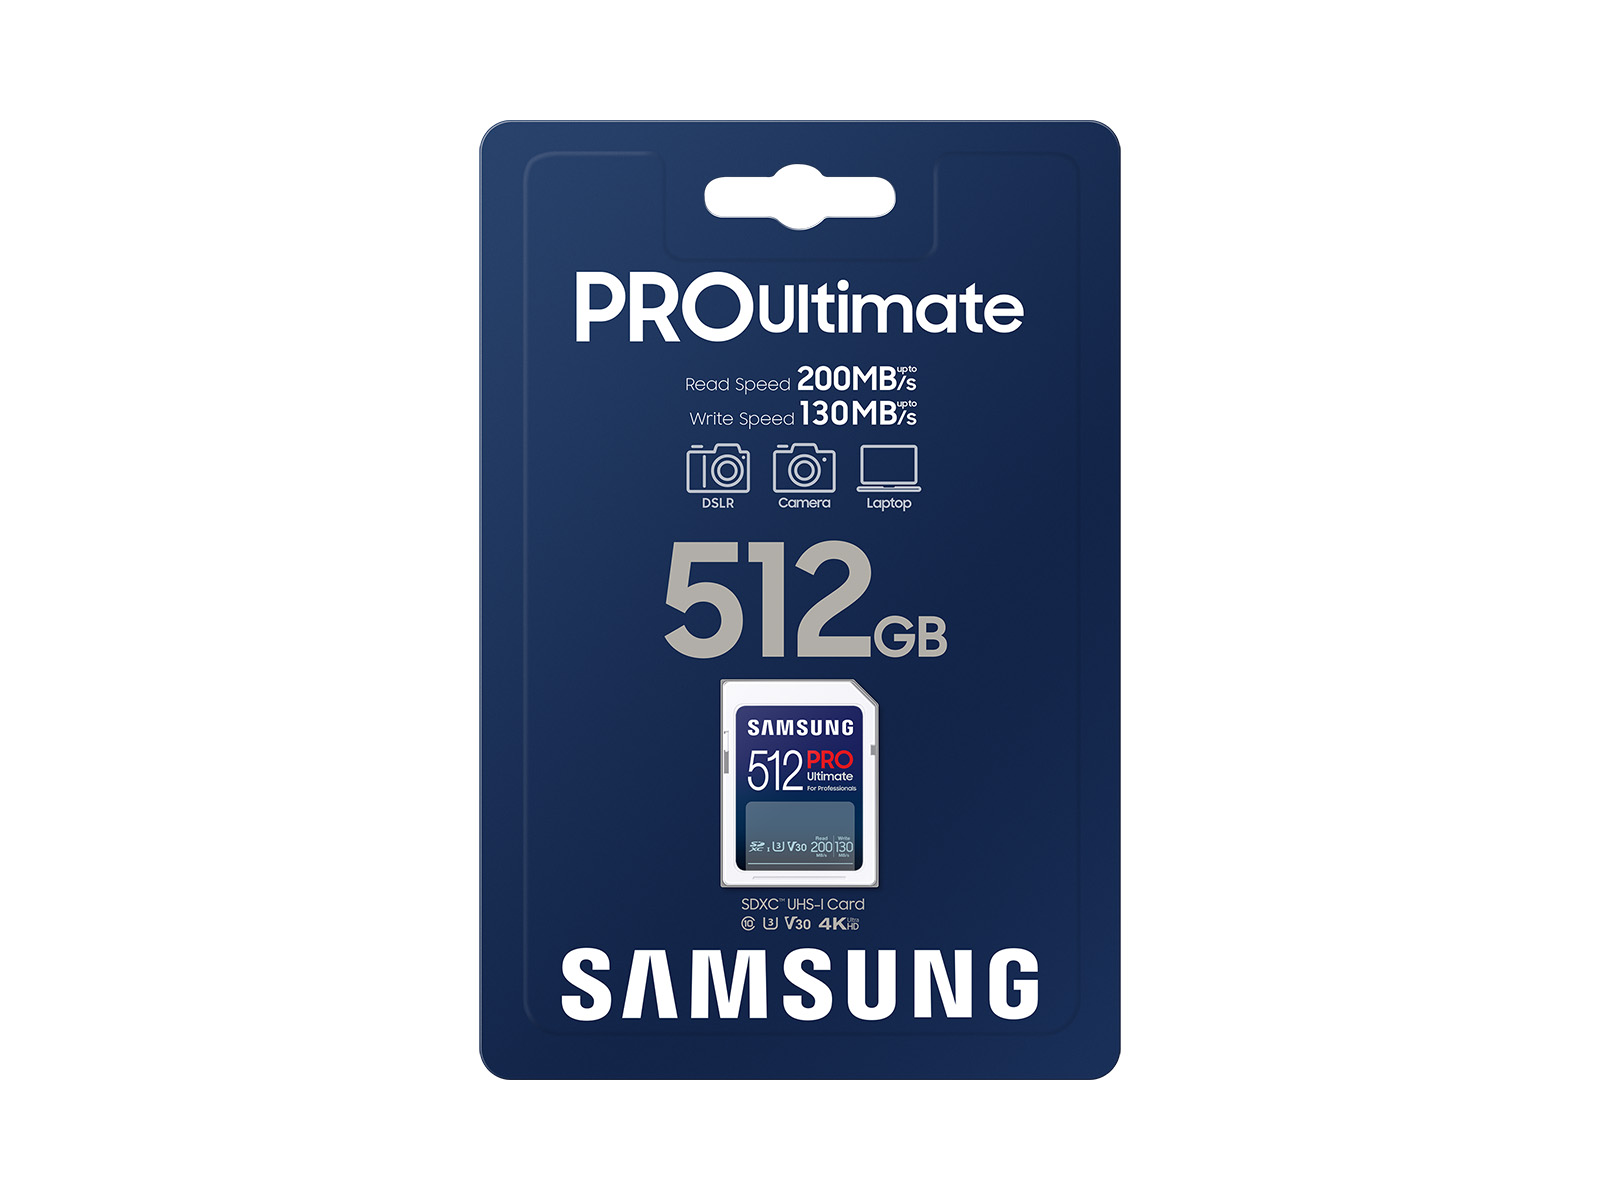 Pack of 200 Micro SD Card 512 MB for Mobile Phone at Rs 12200 in